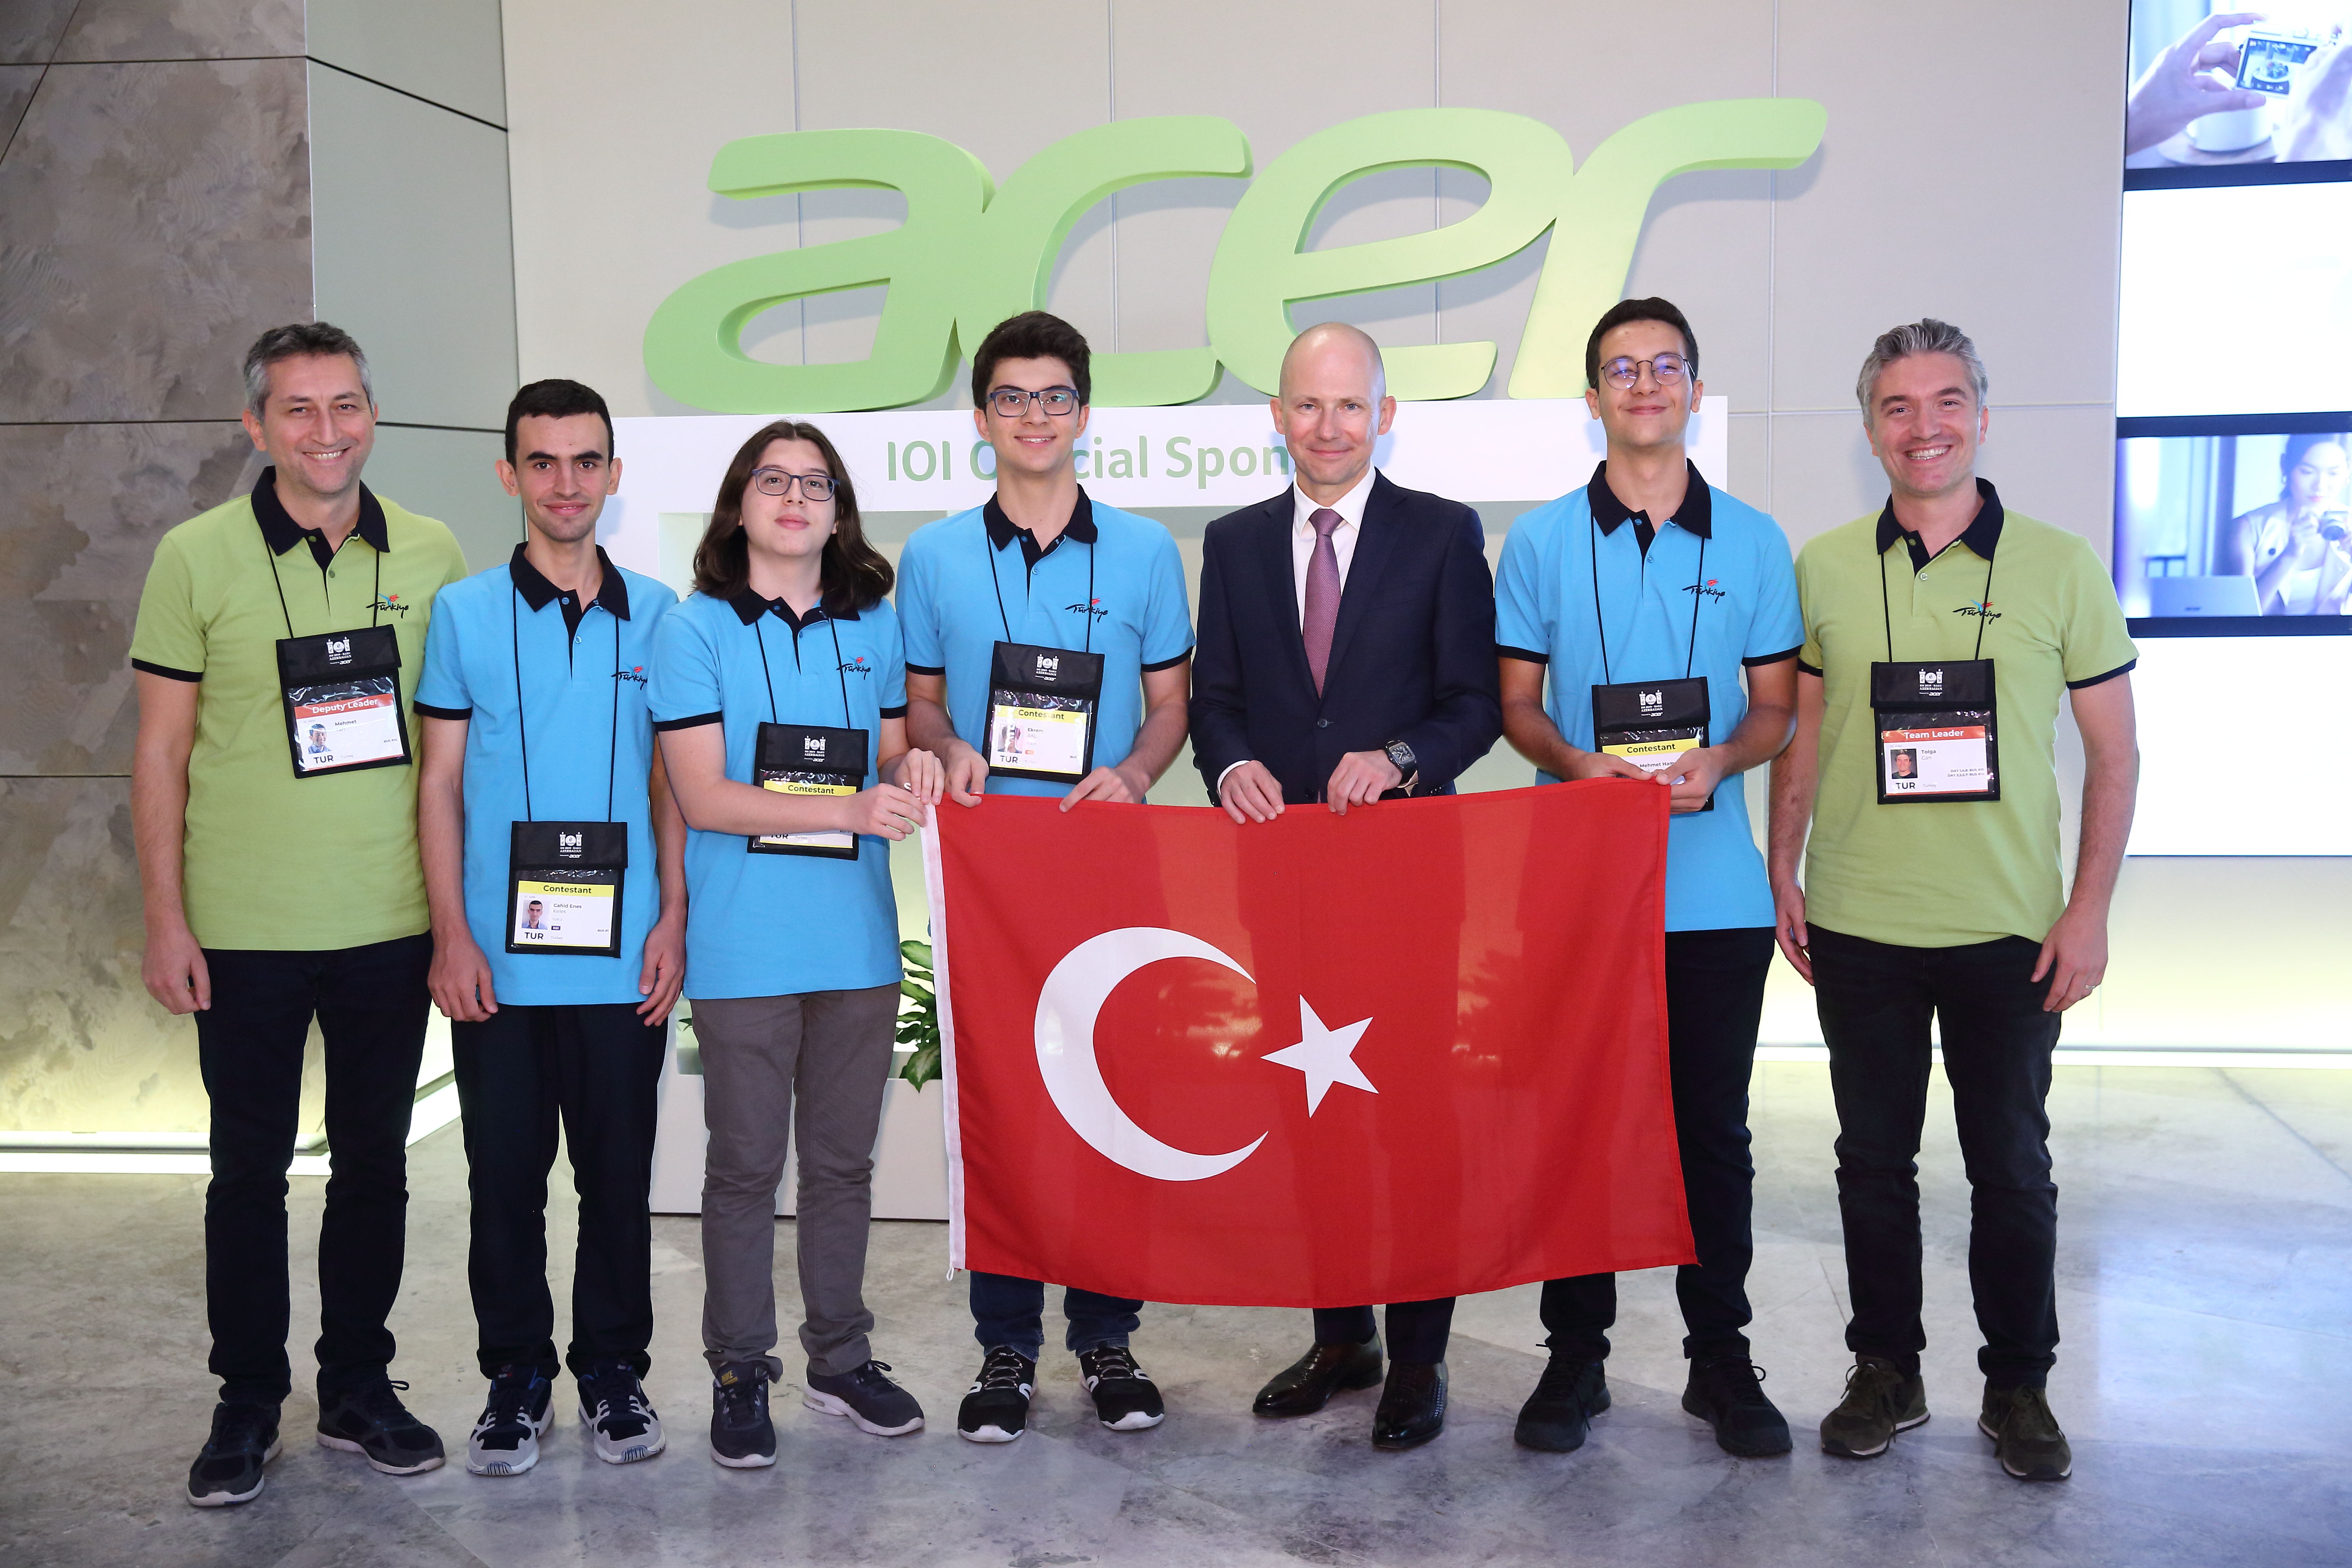 Grigory Nizovsky, Acer Vice President for Russia, Eastern Europe and Turkey with the team from Turkey